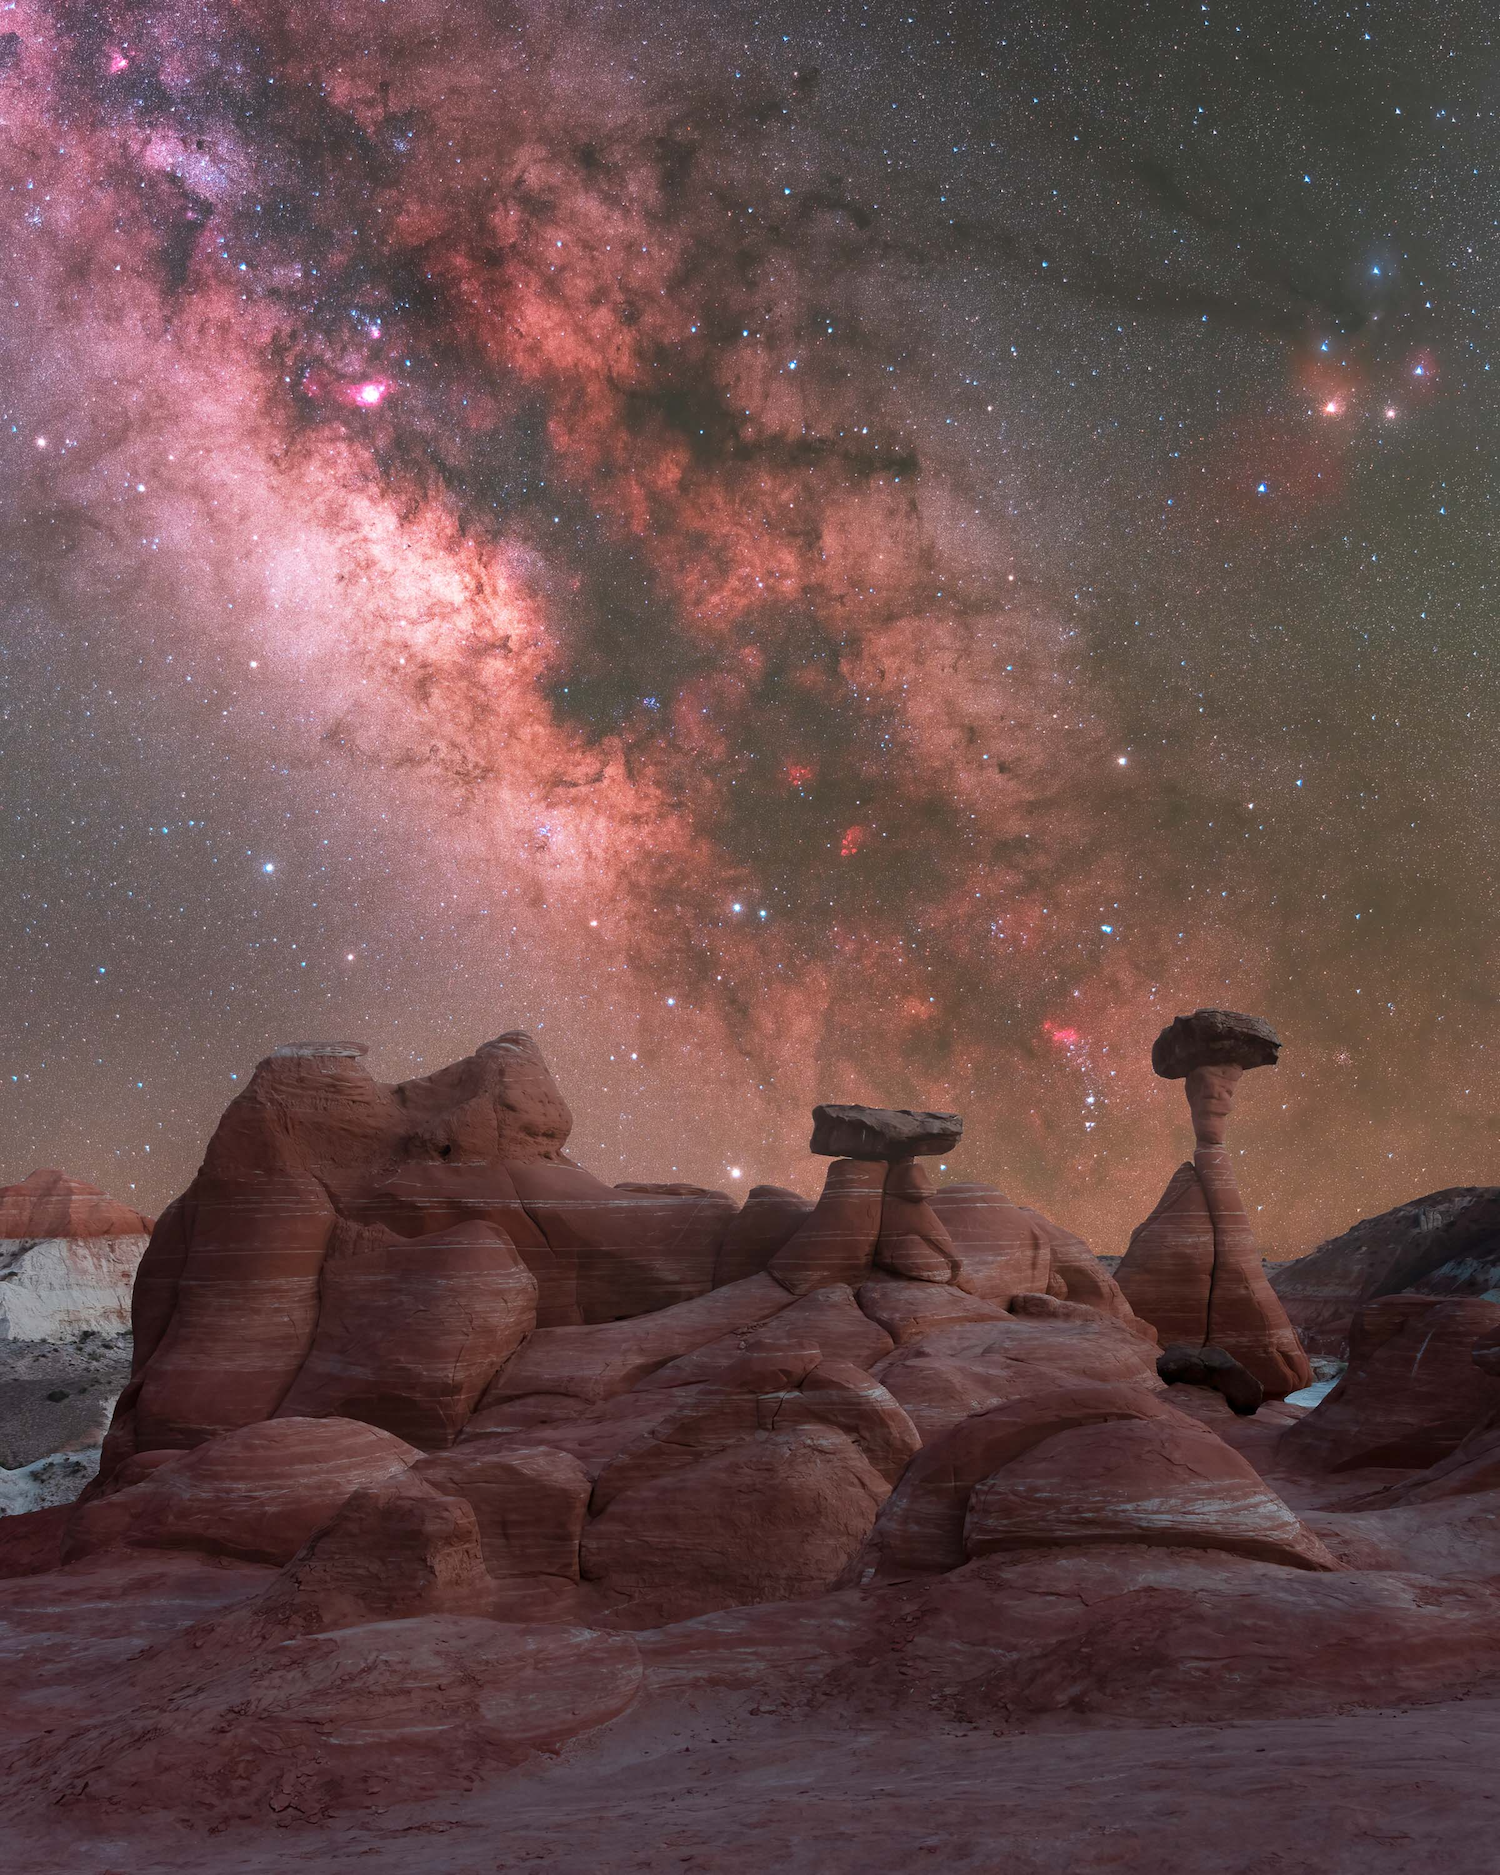 desert rock formations under stars and a reddish cloud of space dust